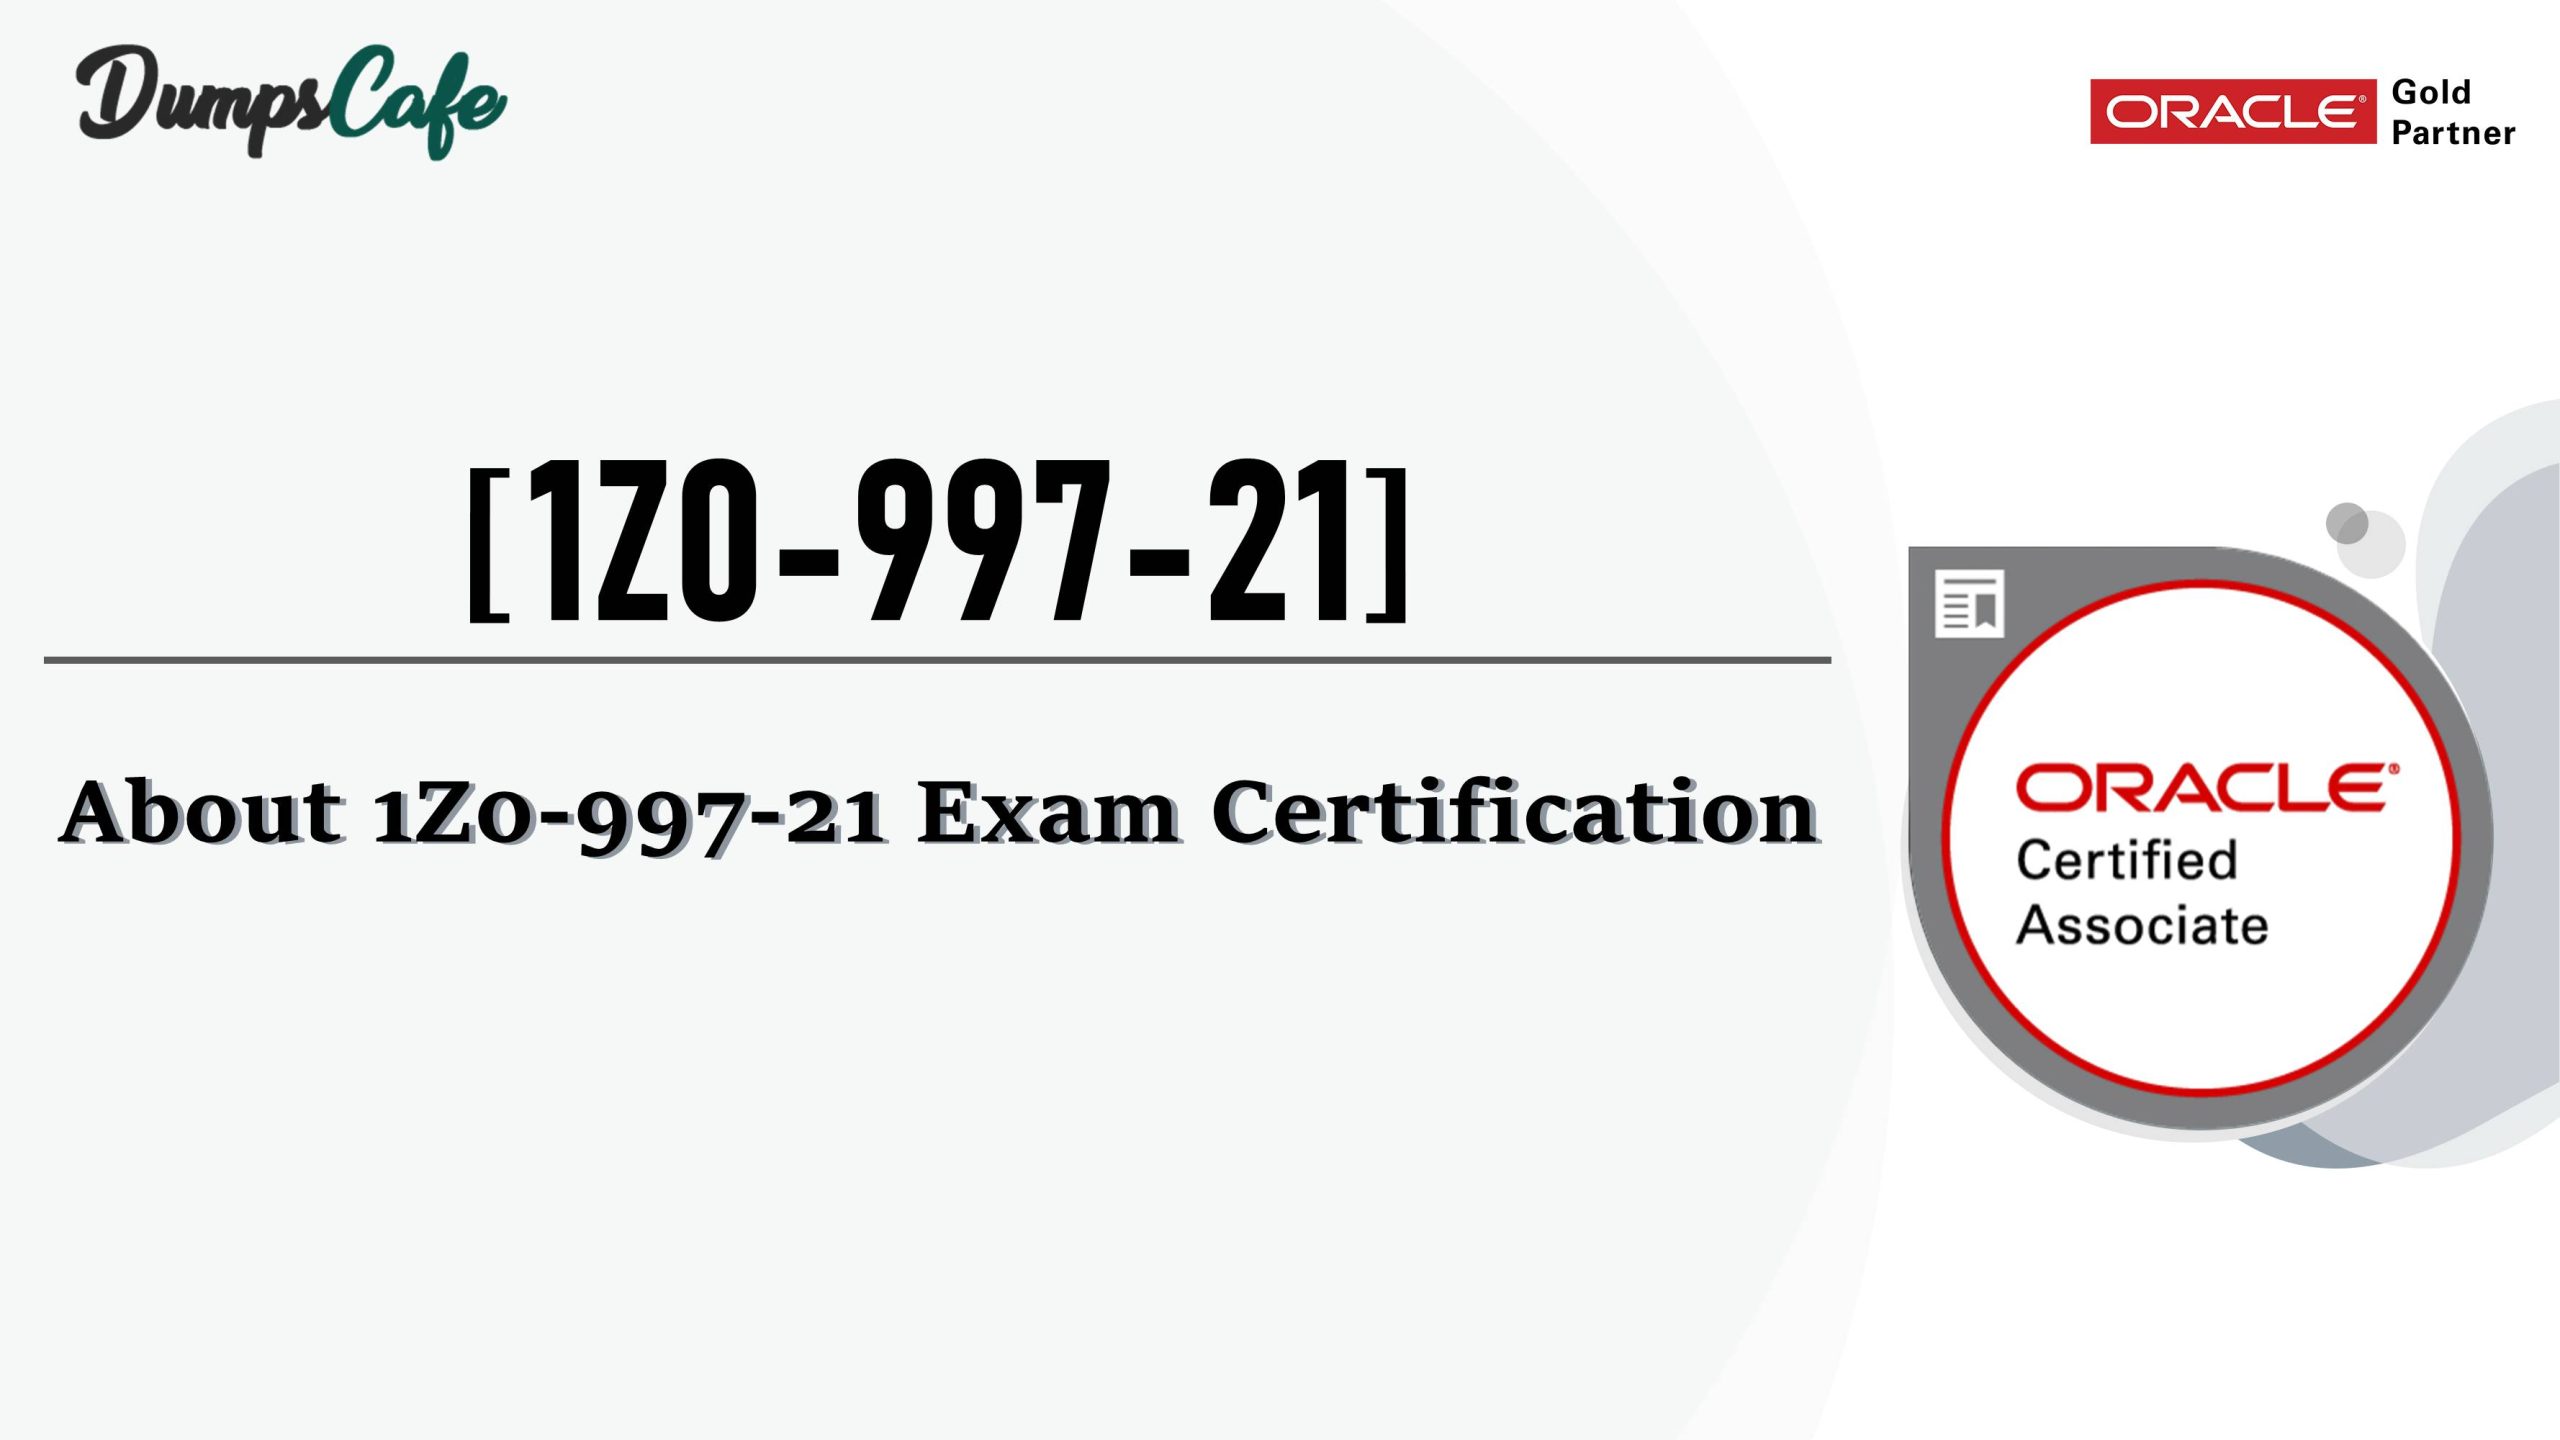 About 1Z0-997-21 Exam Certification